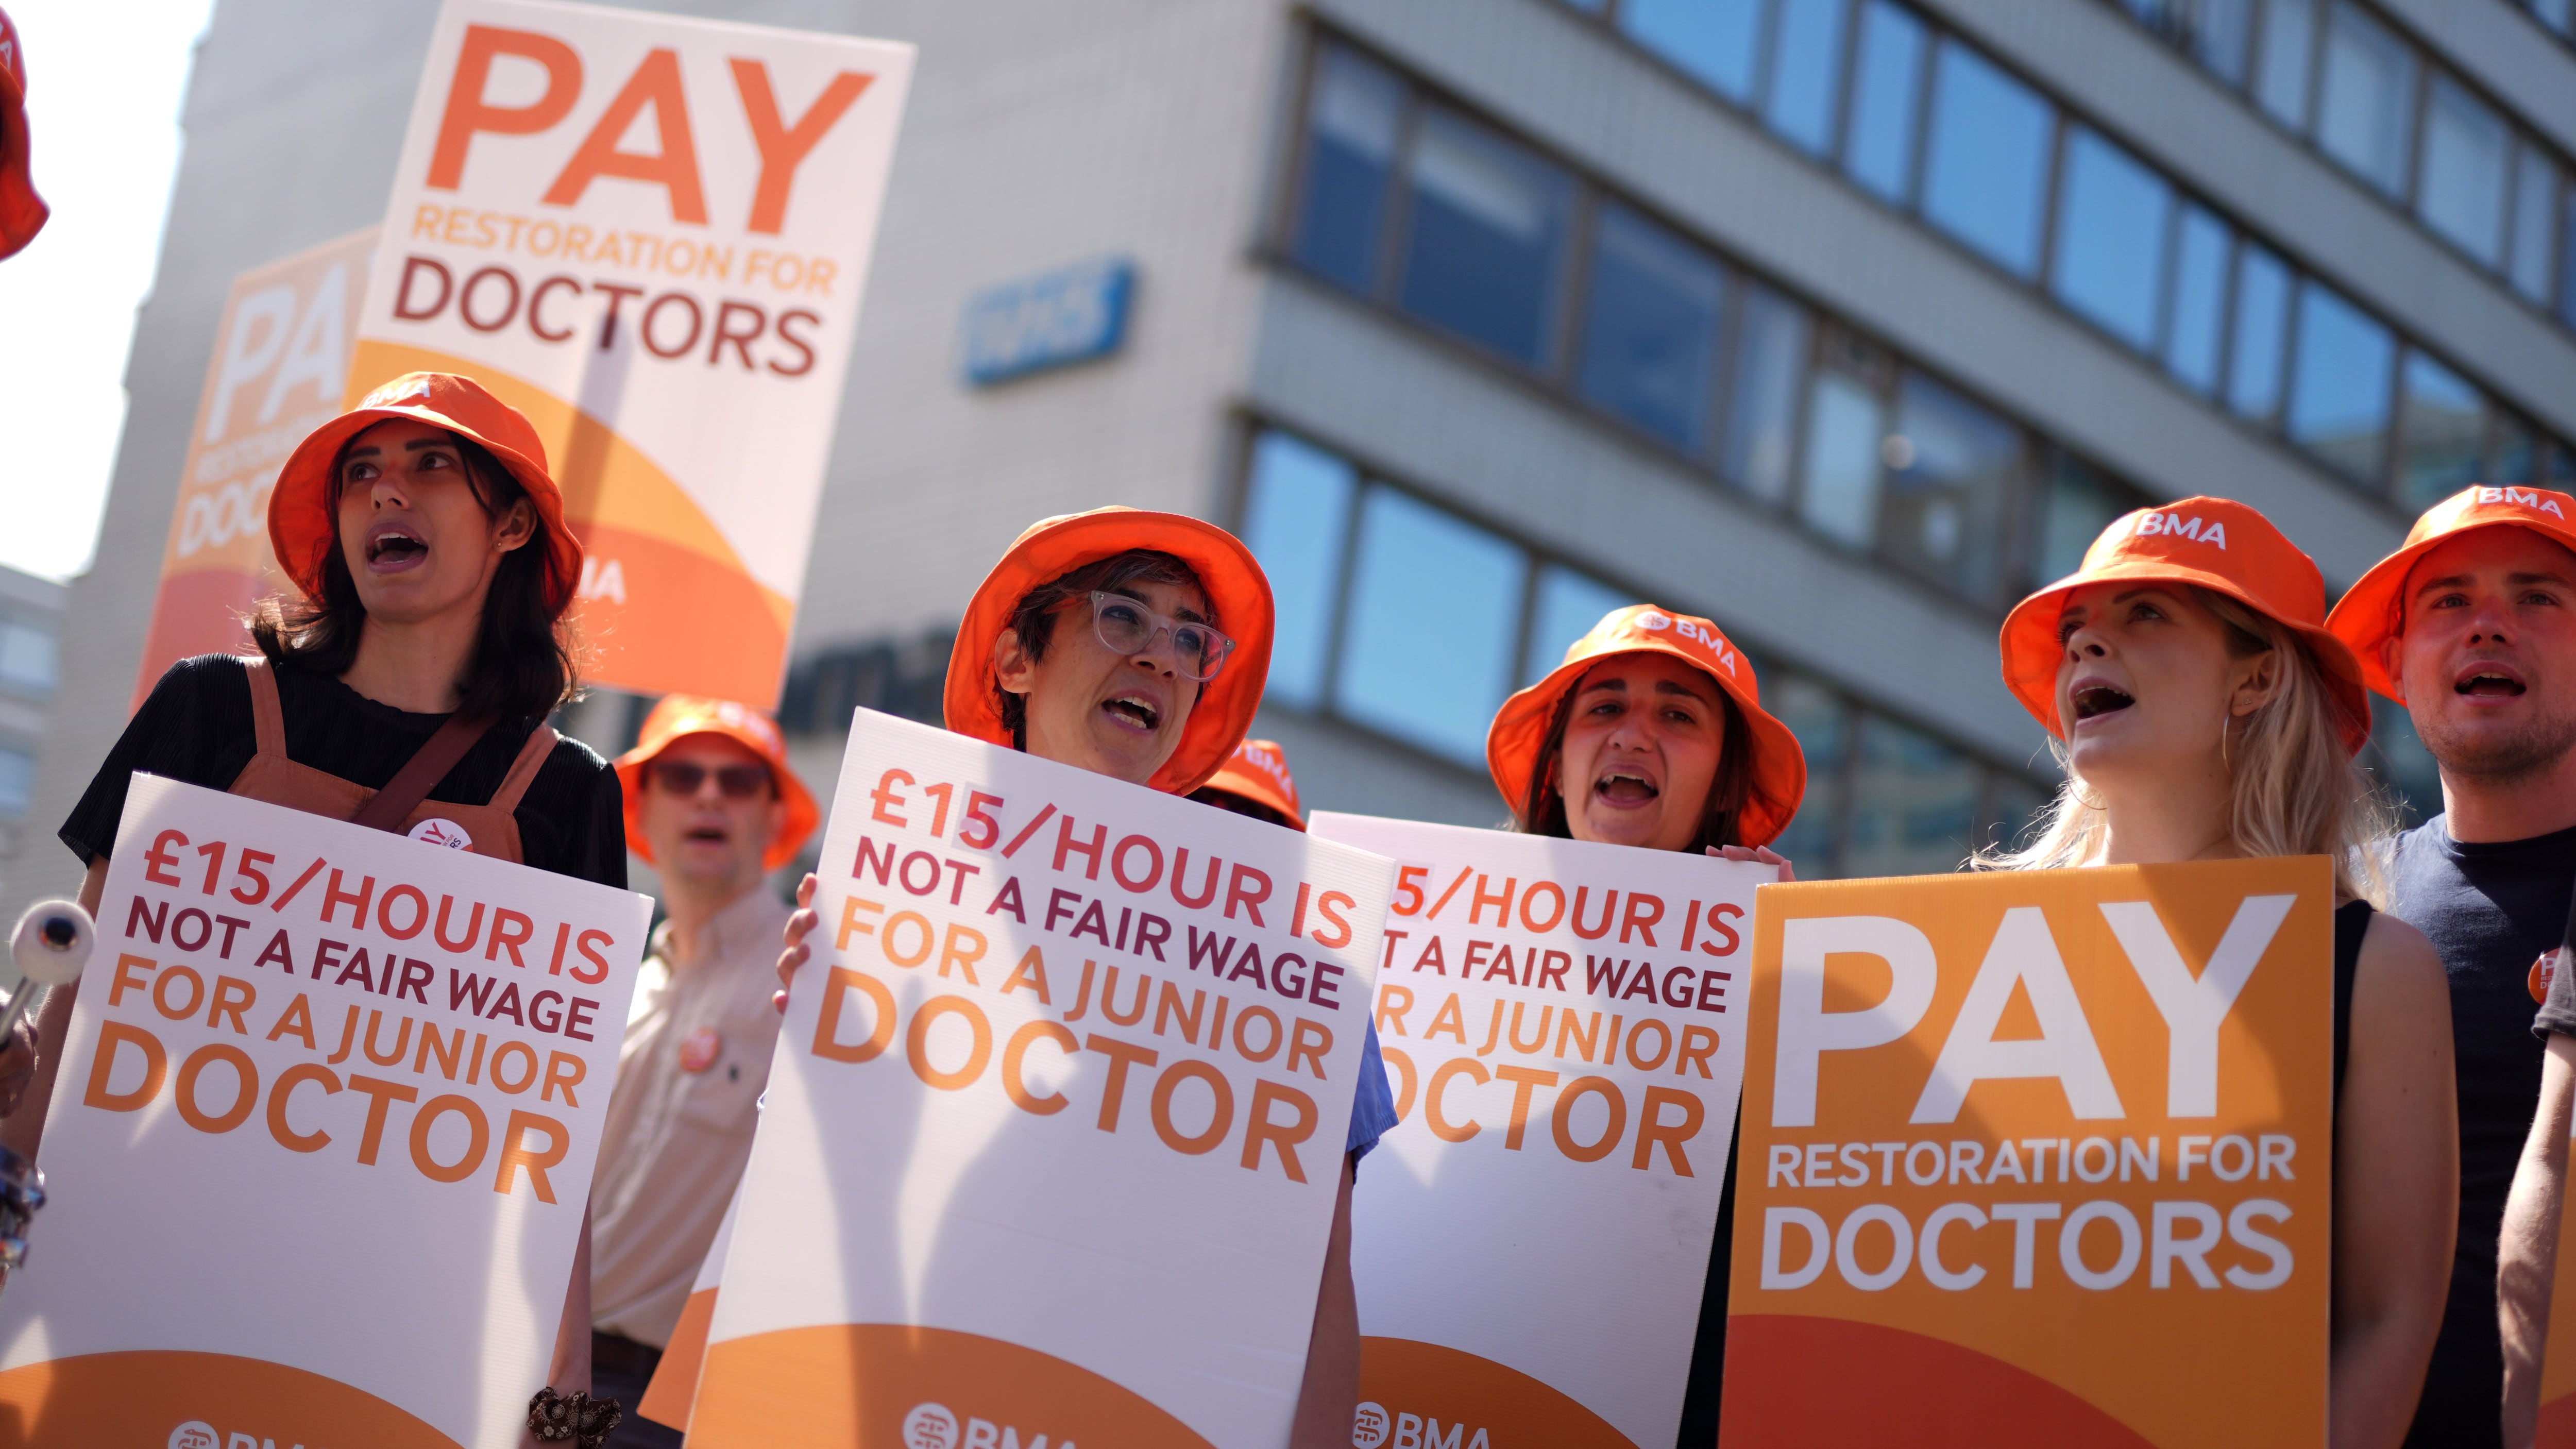 Junior doctors were picketing outside St Thomas’ Hospital in London on Thursday